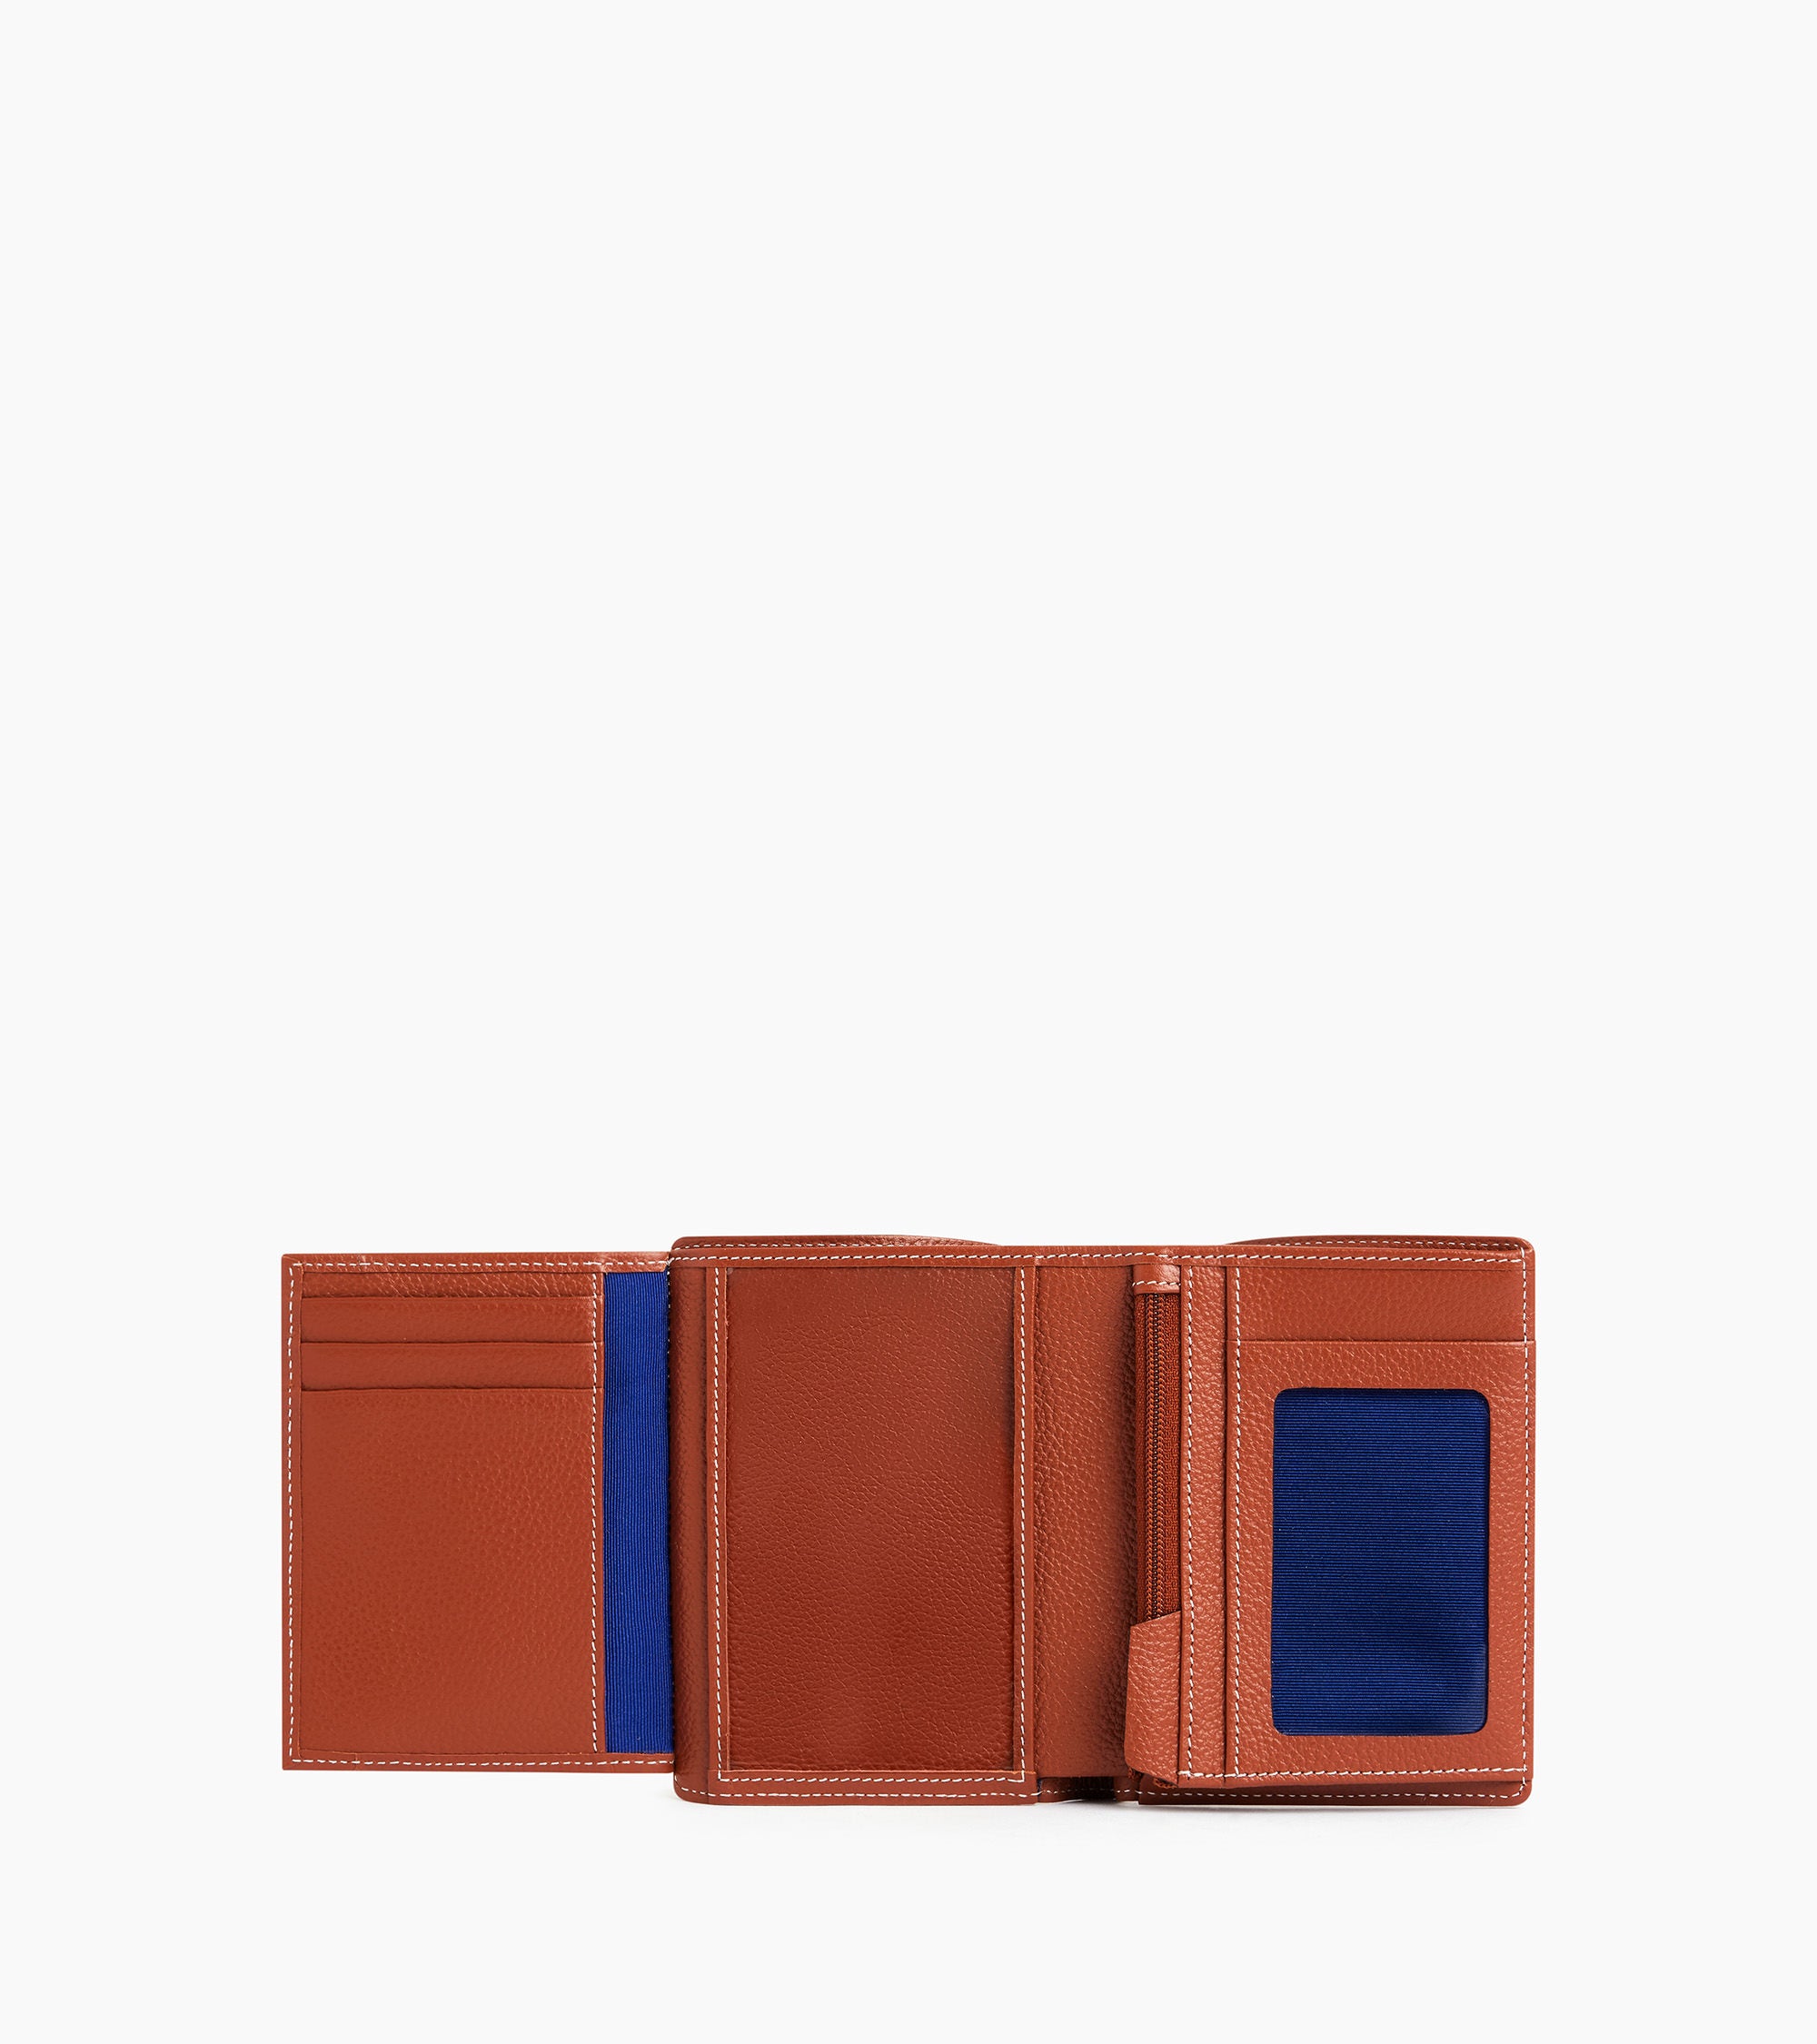 Emile vertical, zipped wallet with 2 gussets in pebbled leather